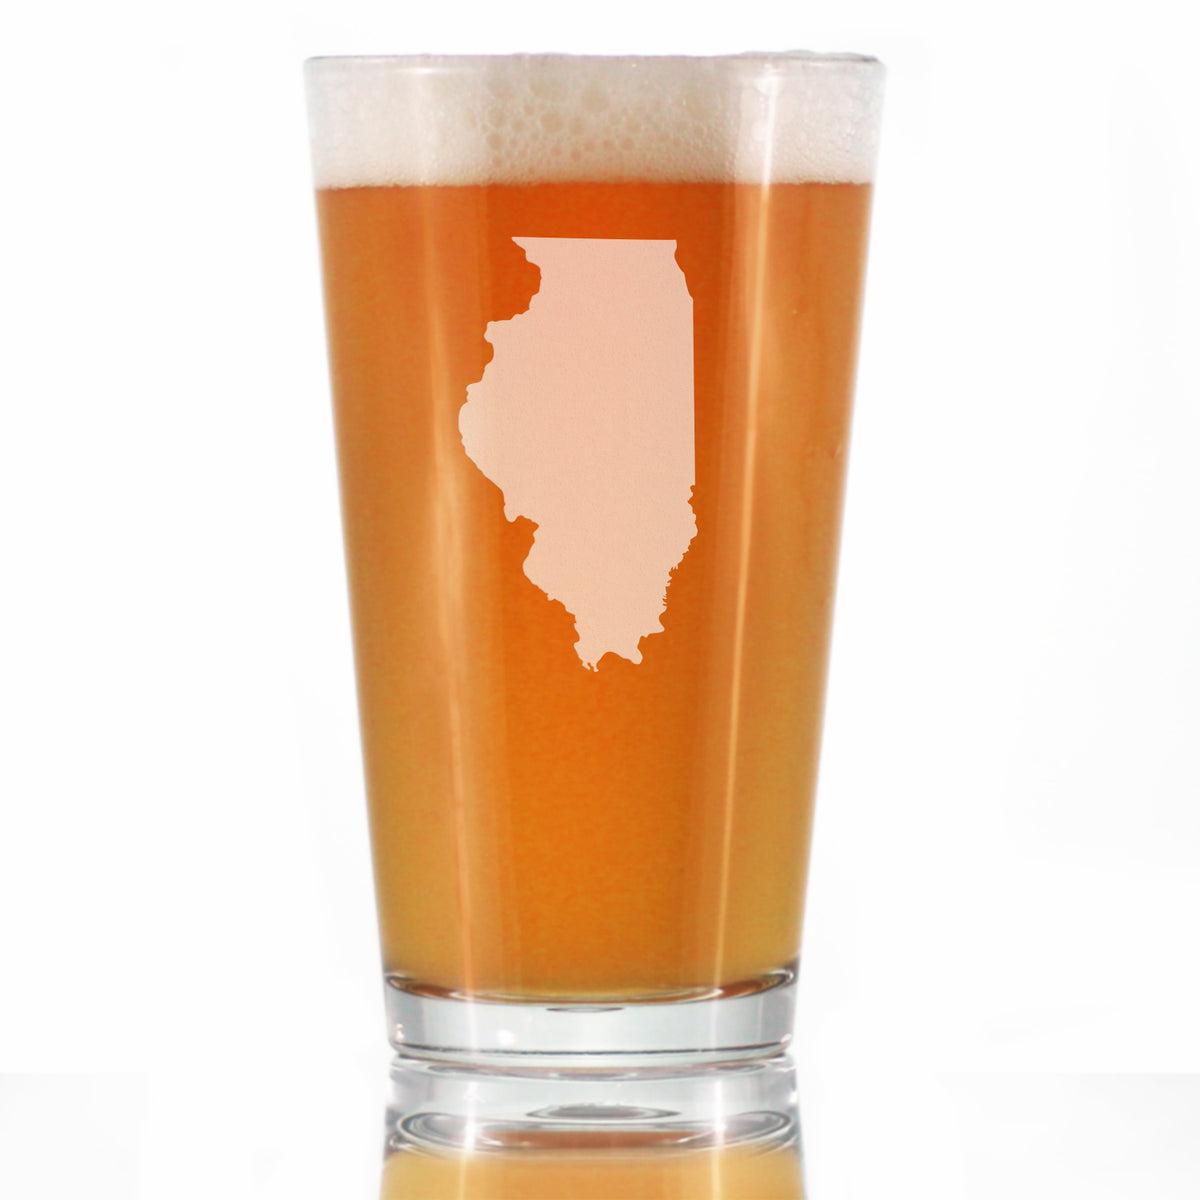 Illinois State Outline Pint Glass for Beer - State Themed Drinking Decor and Gifts for Illinoisan Women &amp; Men - 16 Oz Glasses